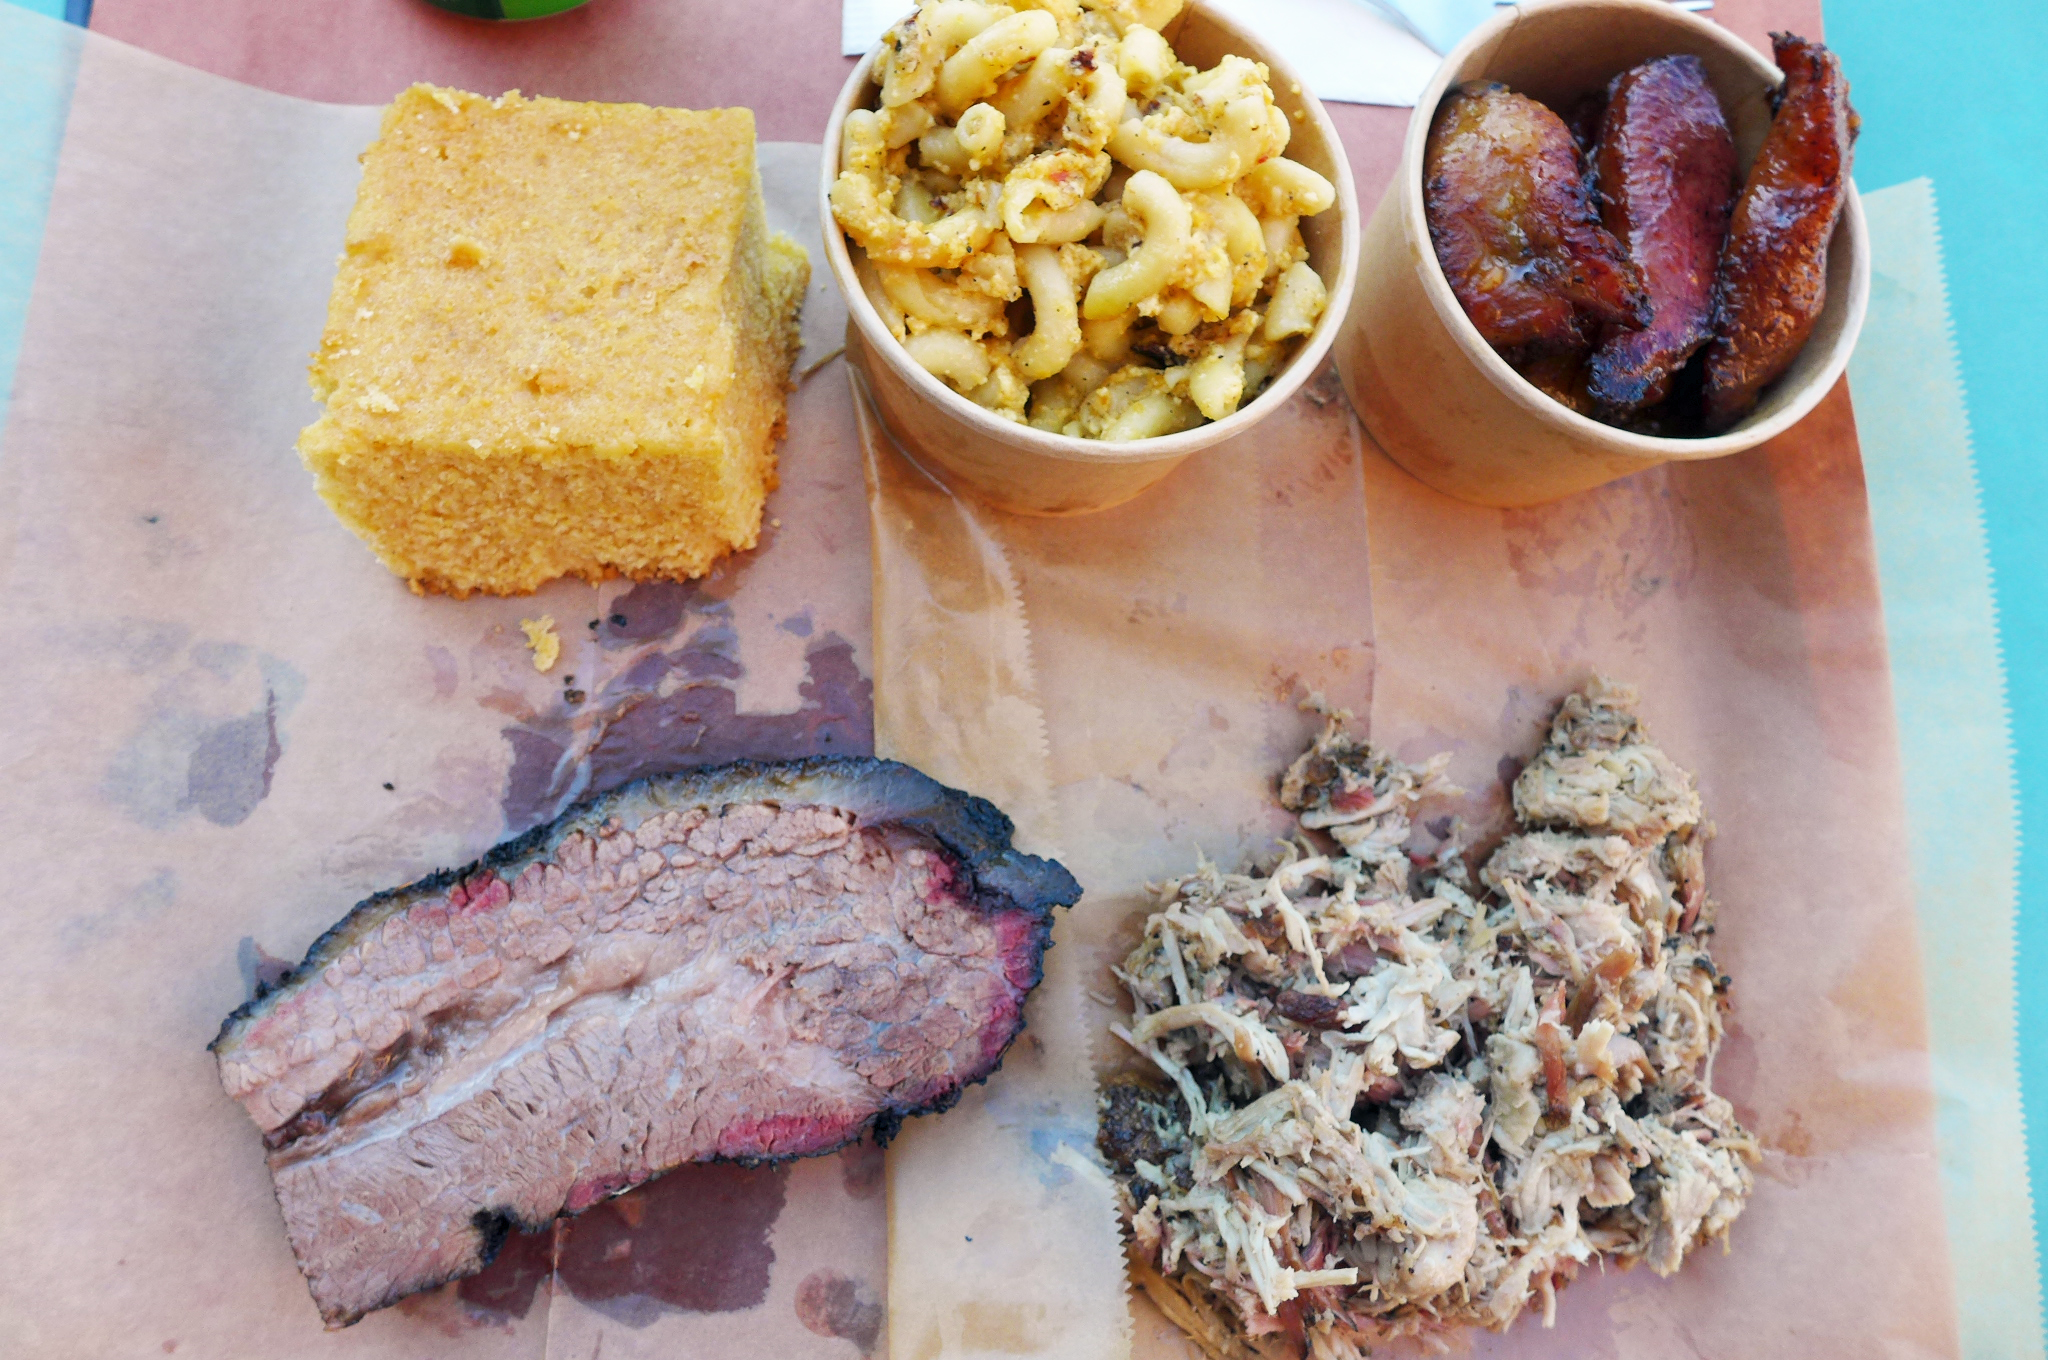 Two meats and three sides on a paper lined tray.